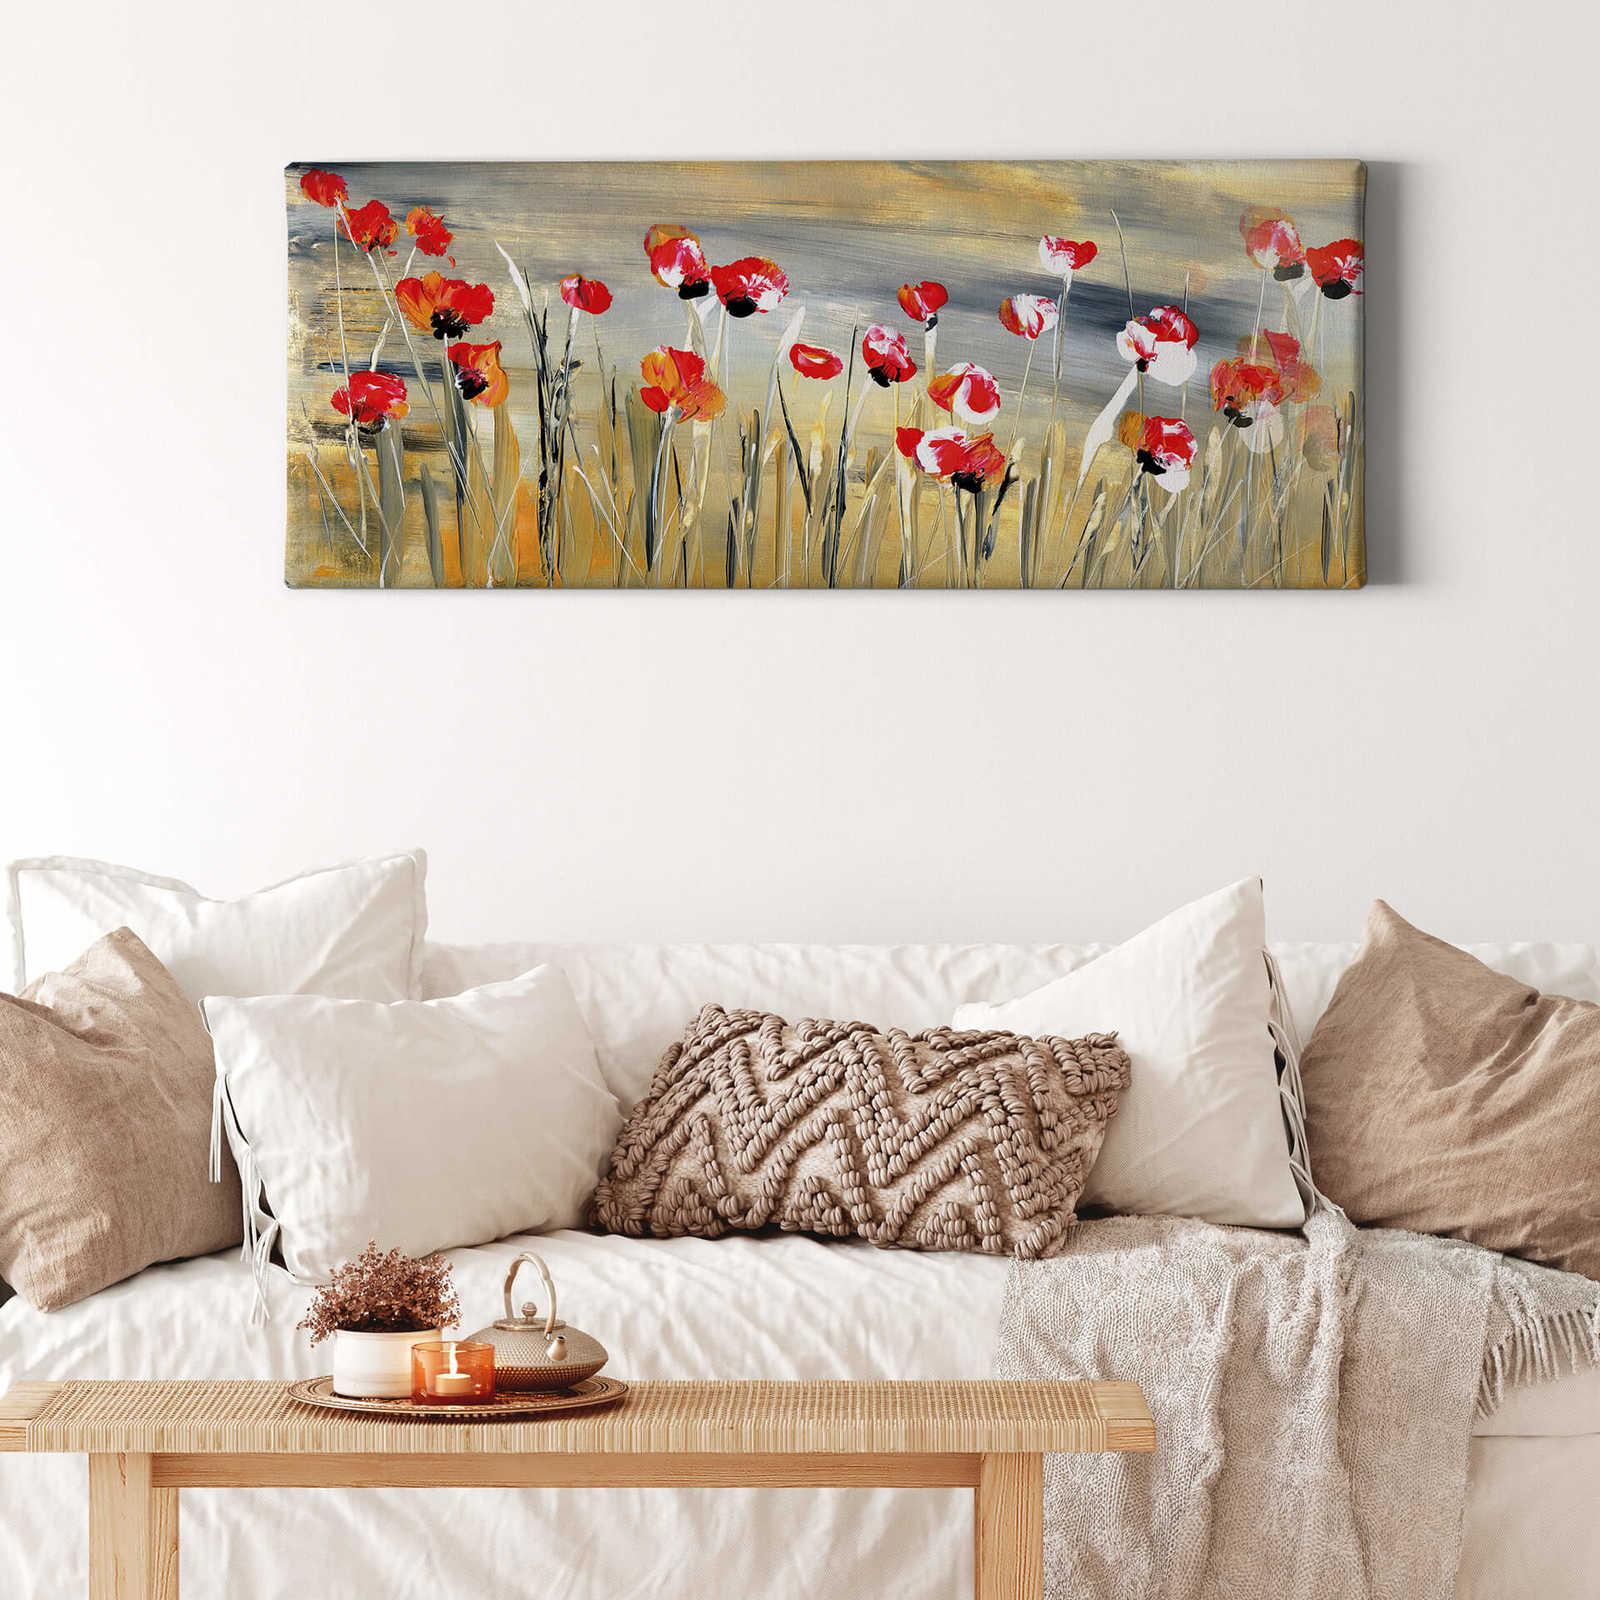             Panorama canvas print red poppy field by Niksic
        